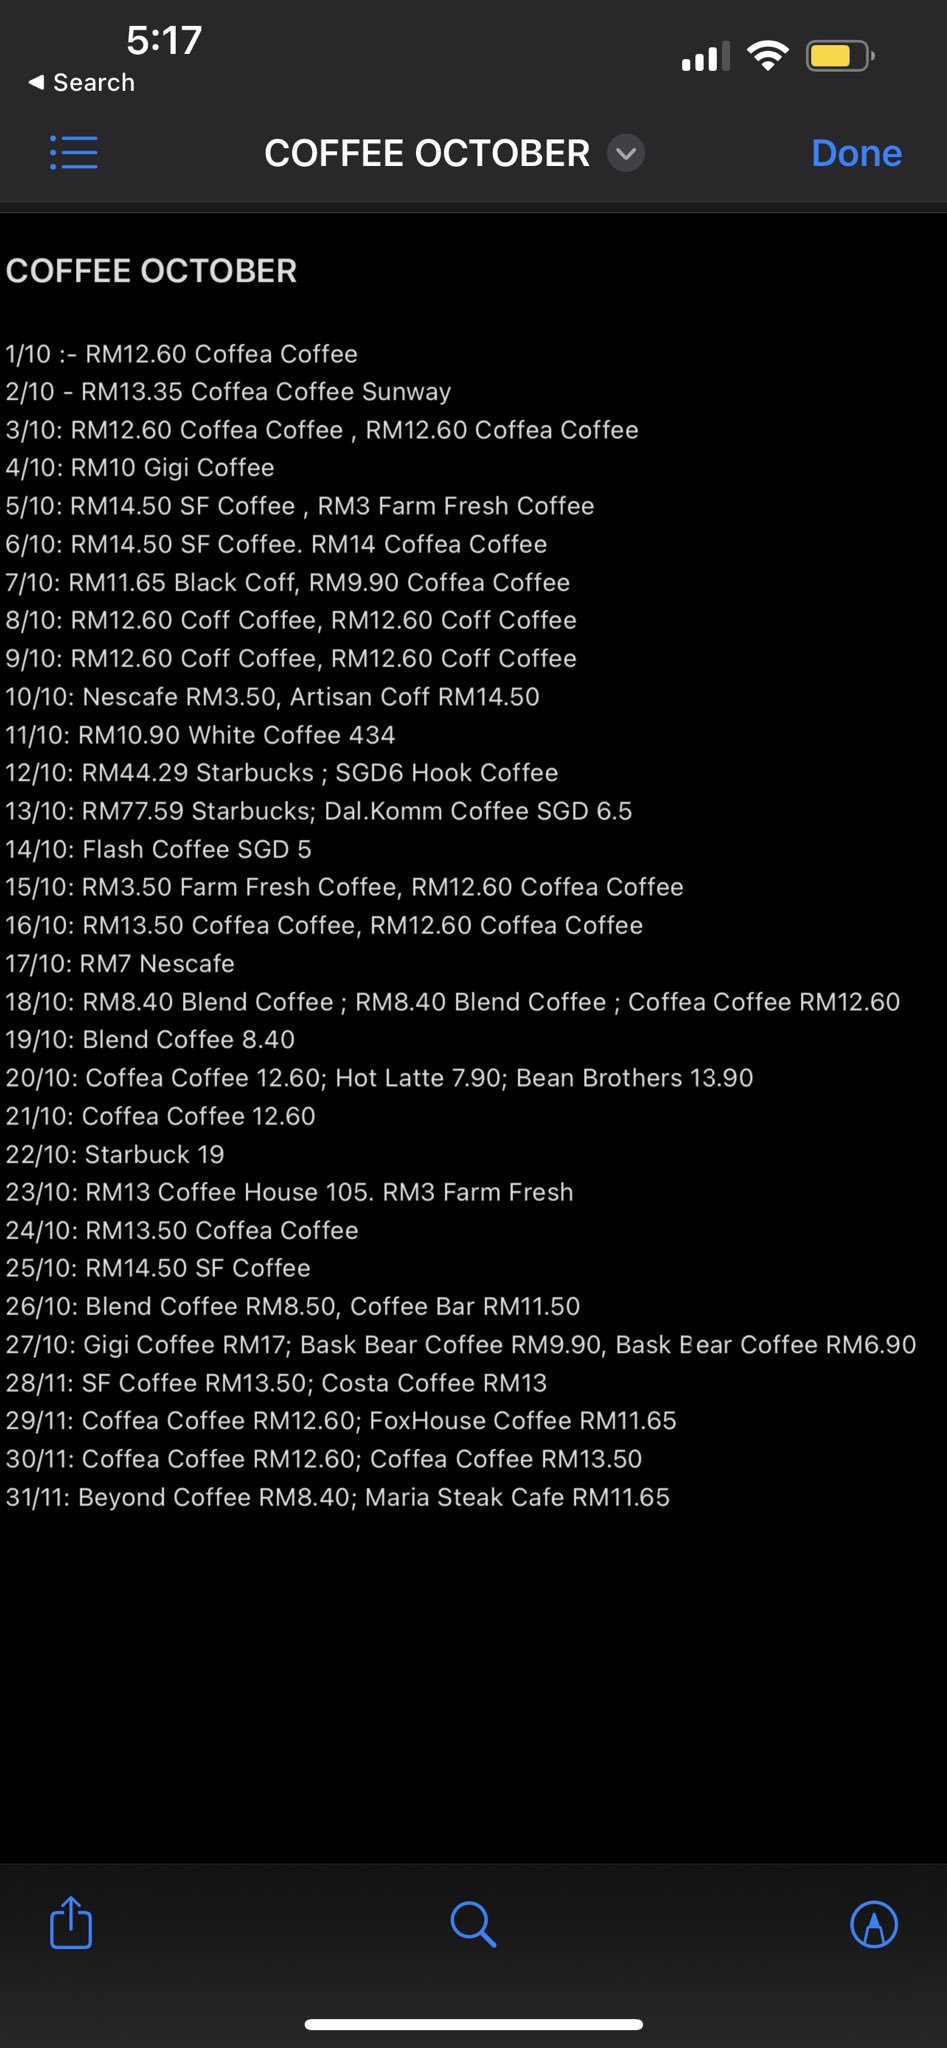 A local netizen recently tallied up his coffee expenses for the month of October. Image credit BaqirNajh